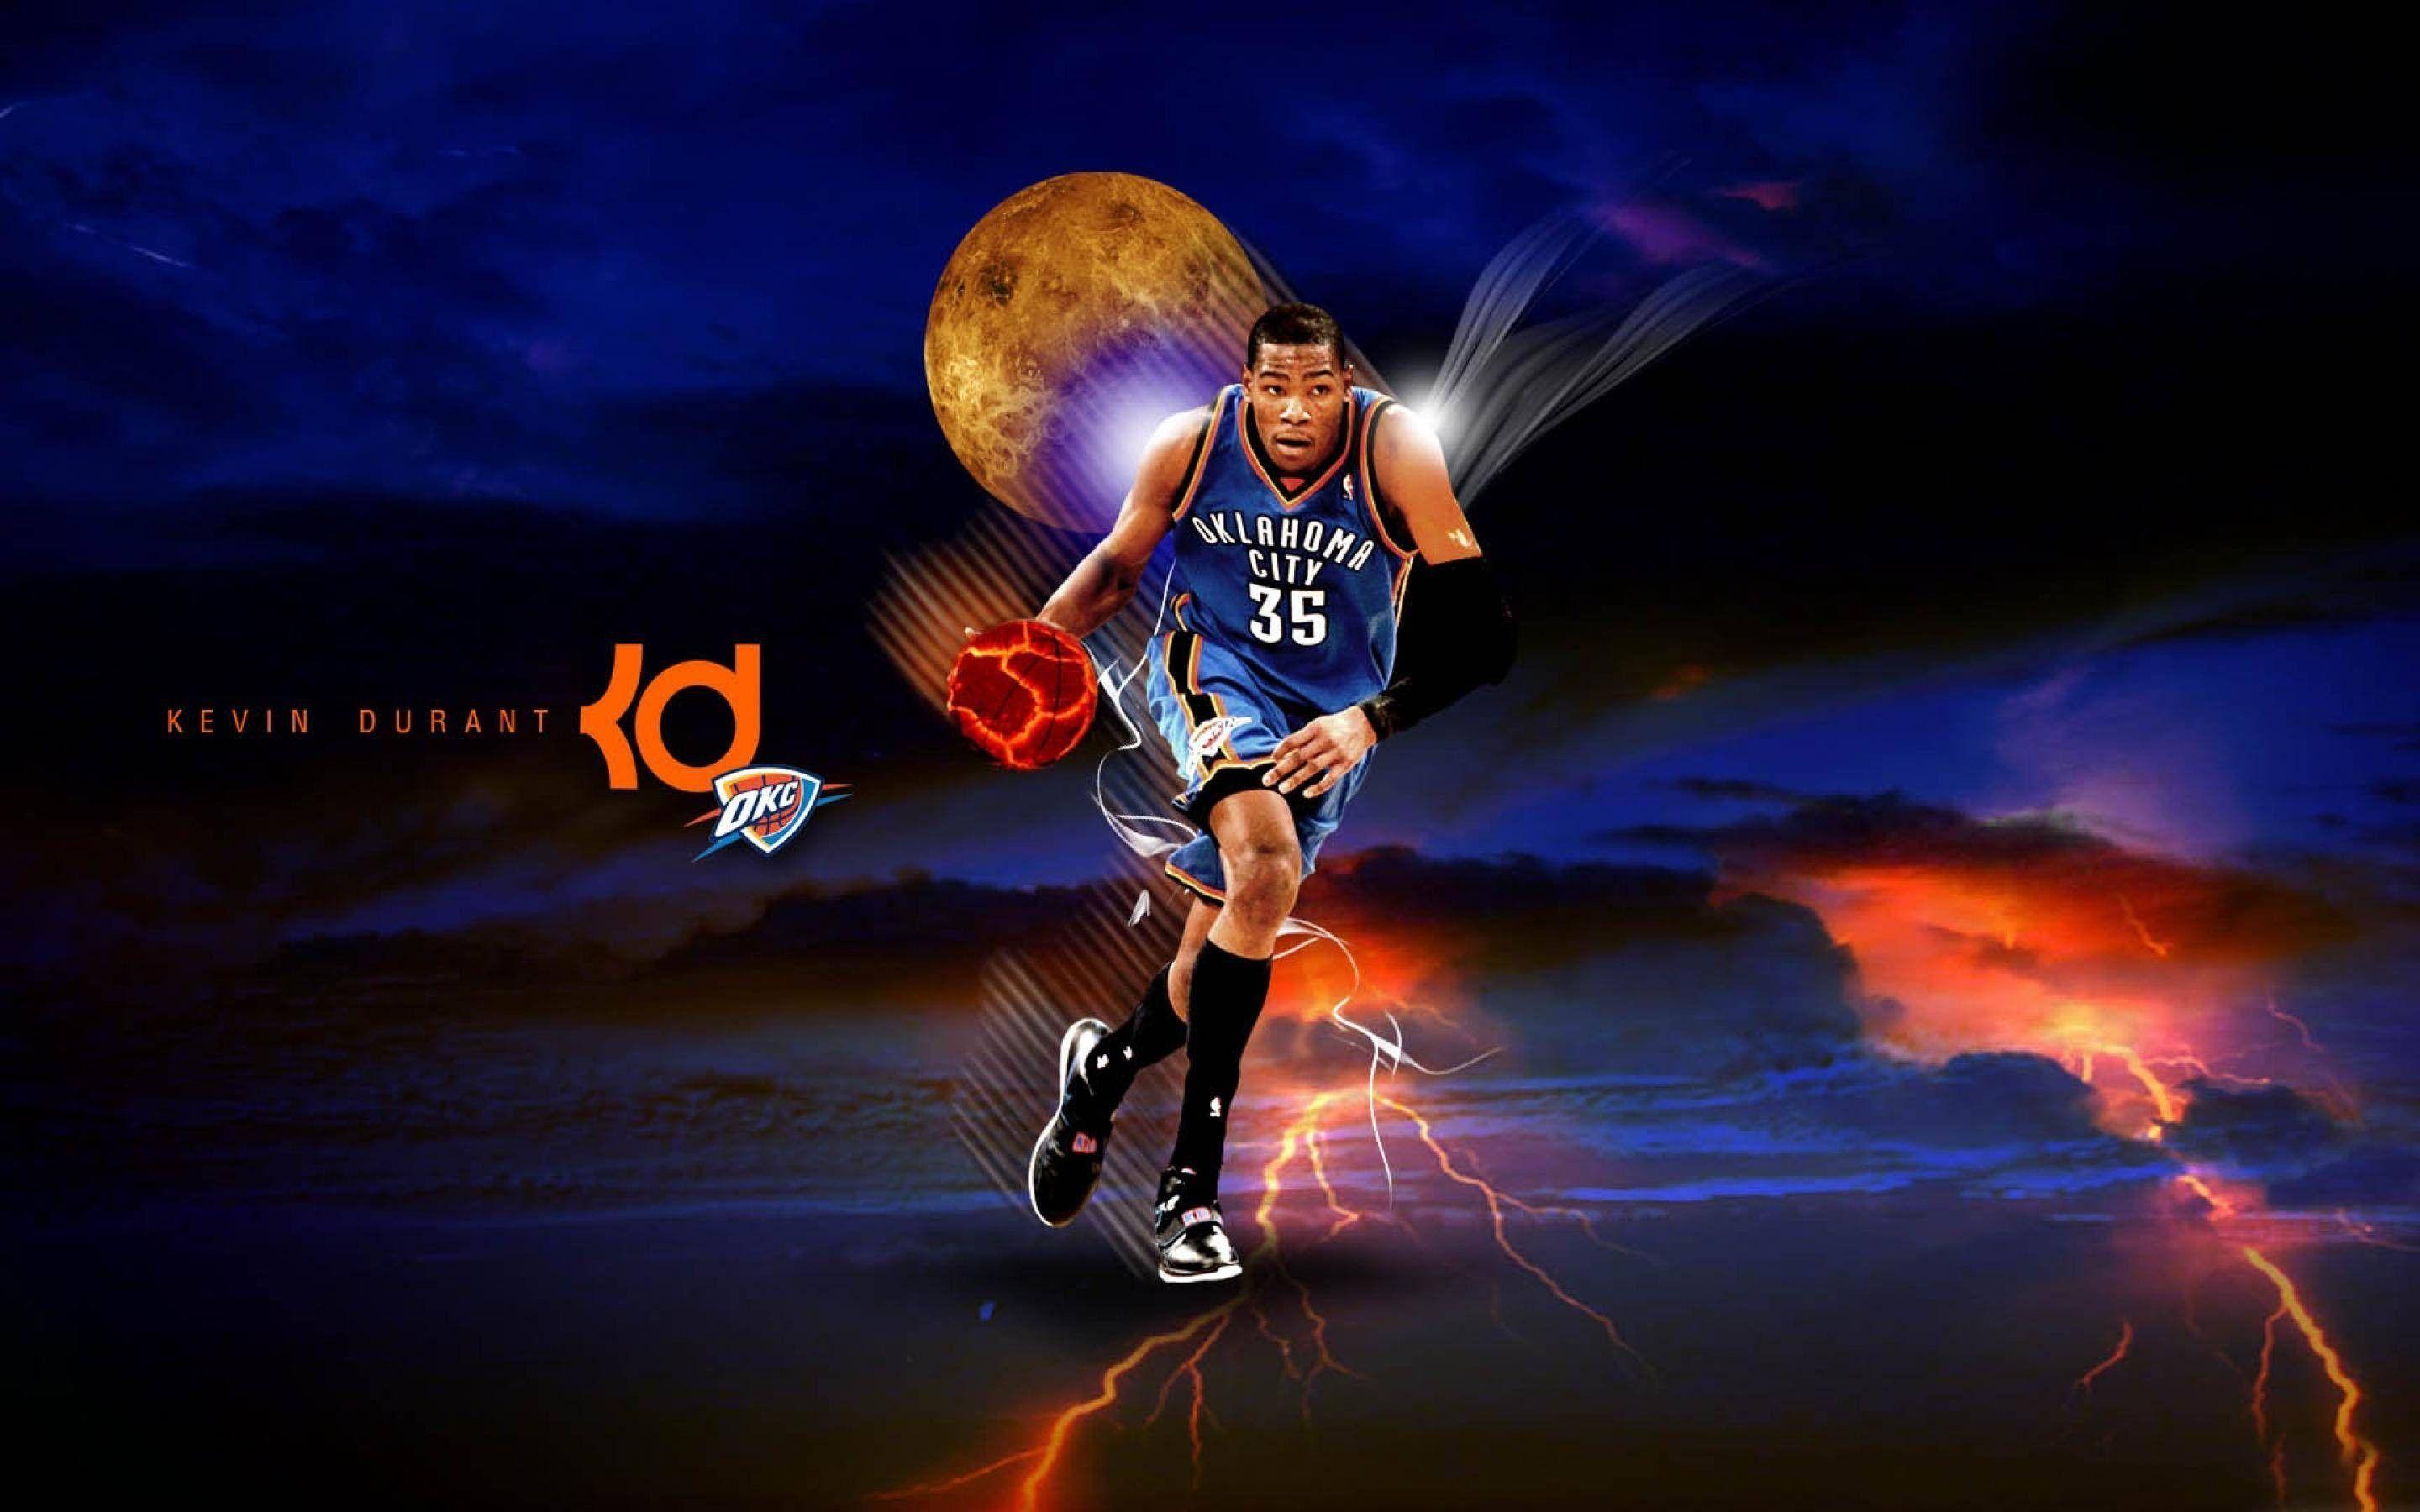 image For > Kevin Durant Wallpaper HD 2014